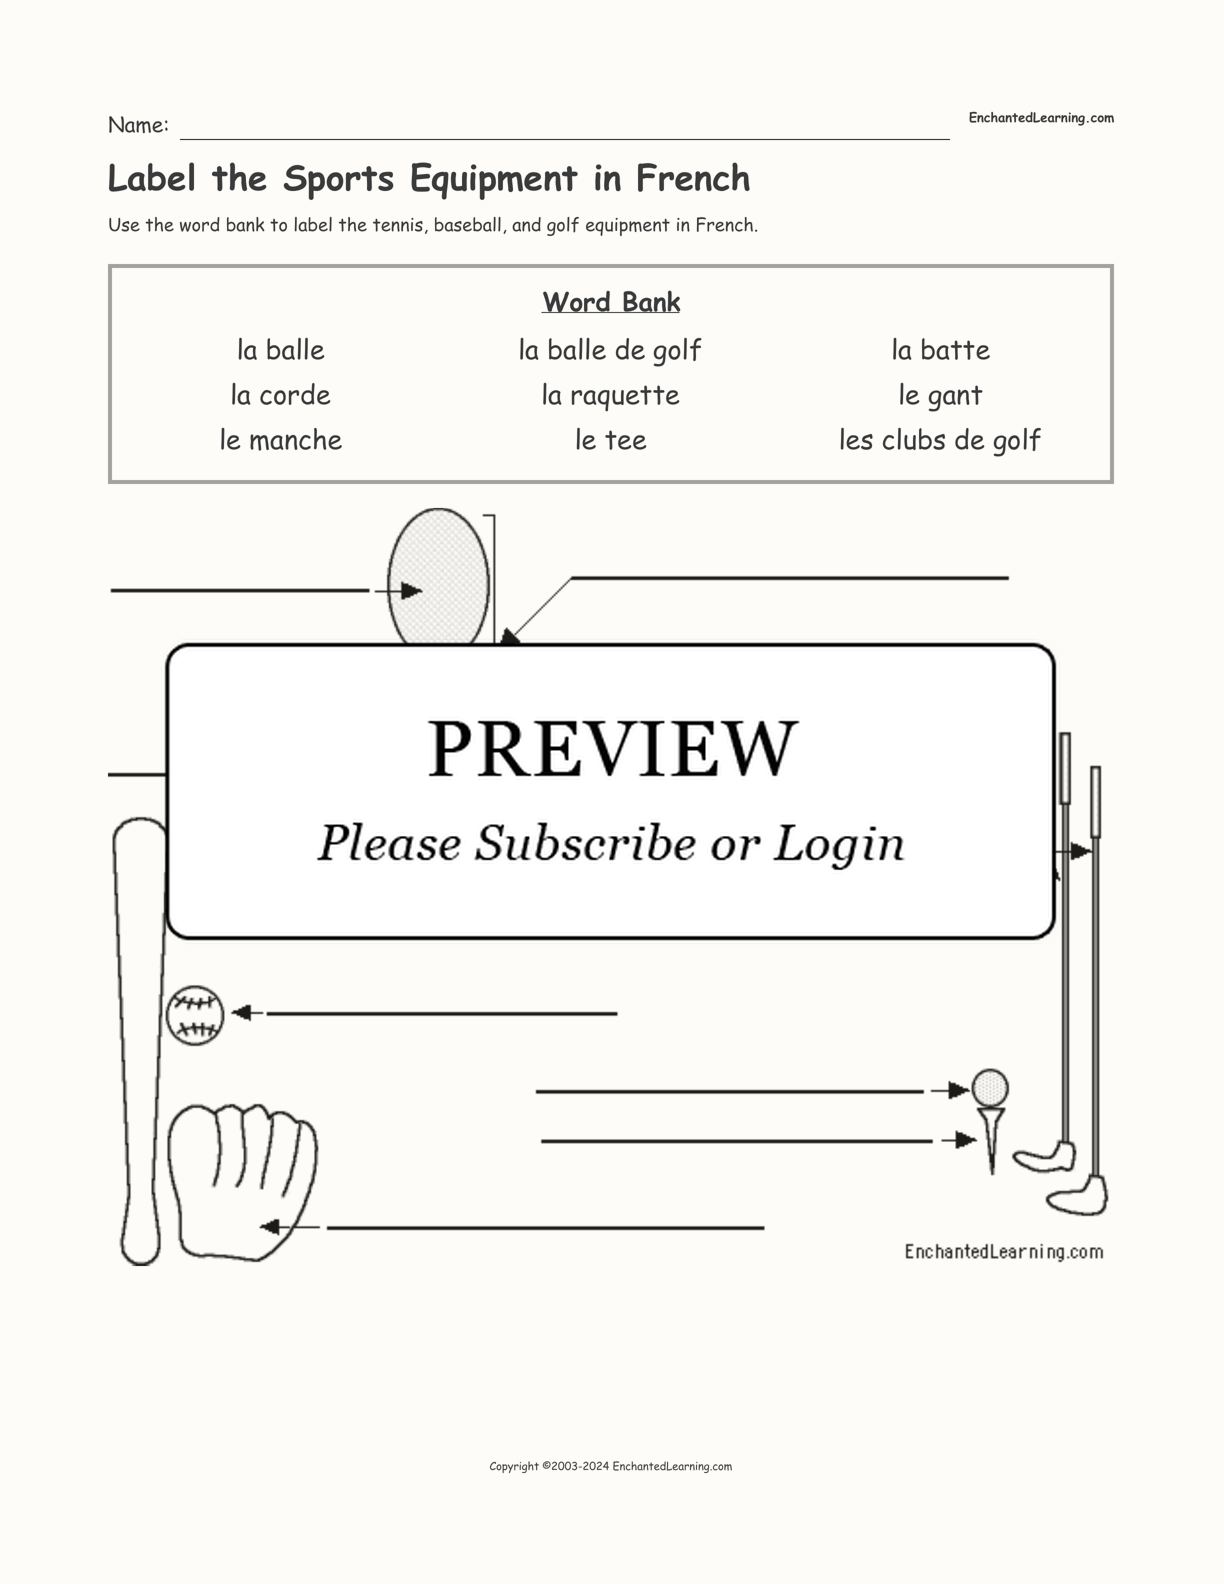 Label the Sports Equipment in French interactive worksheet page 1